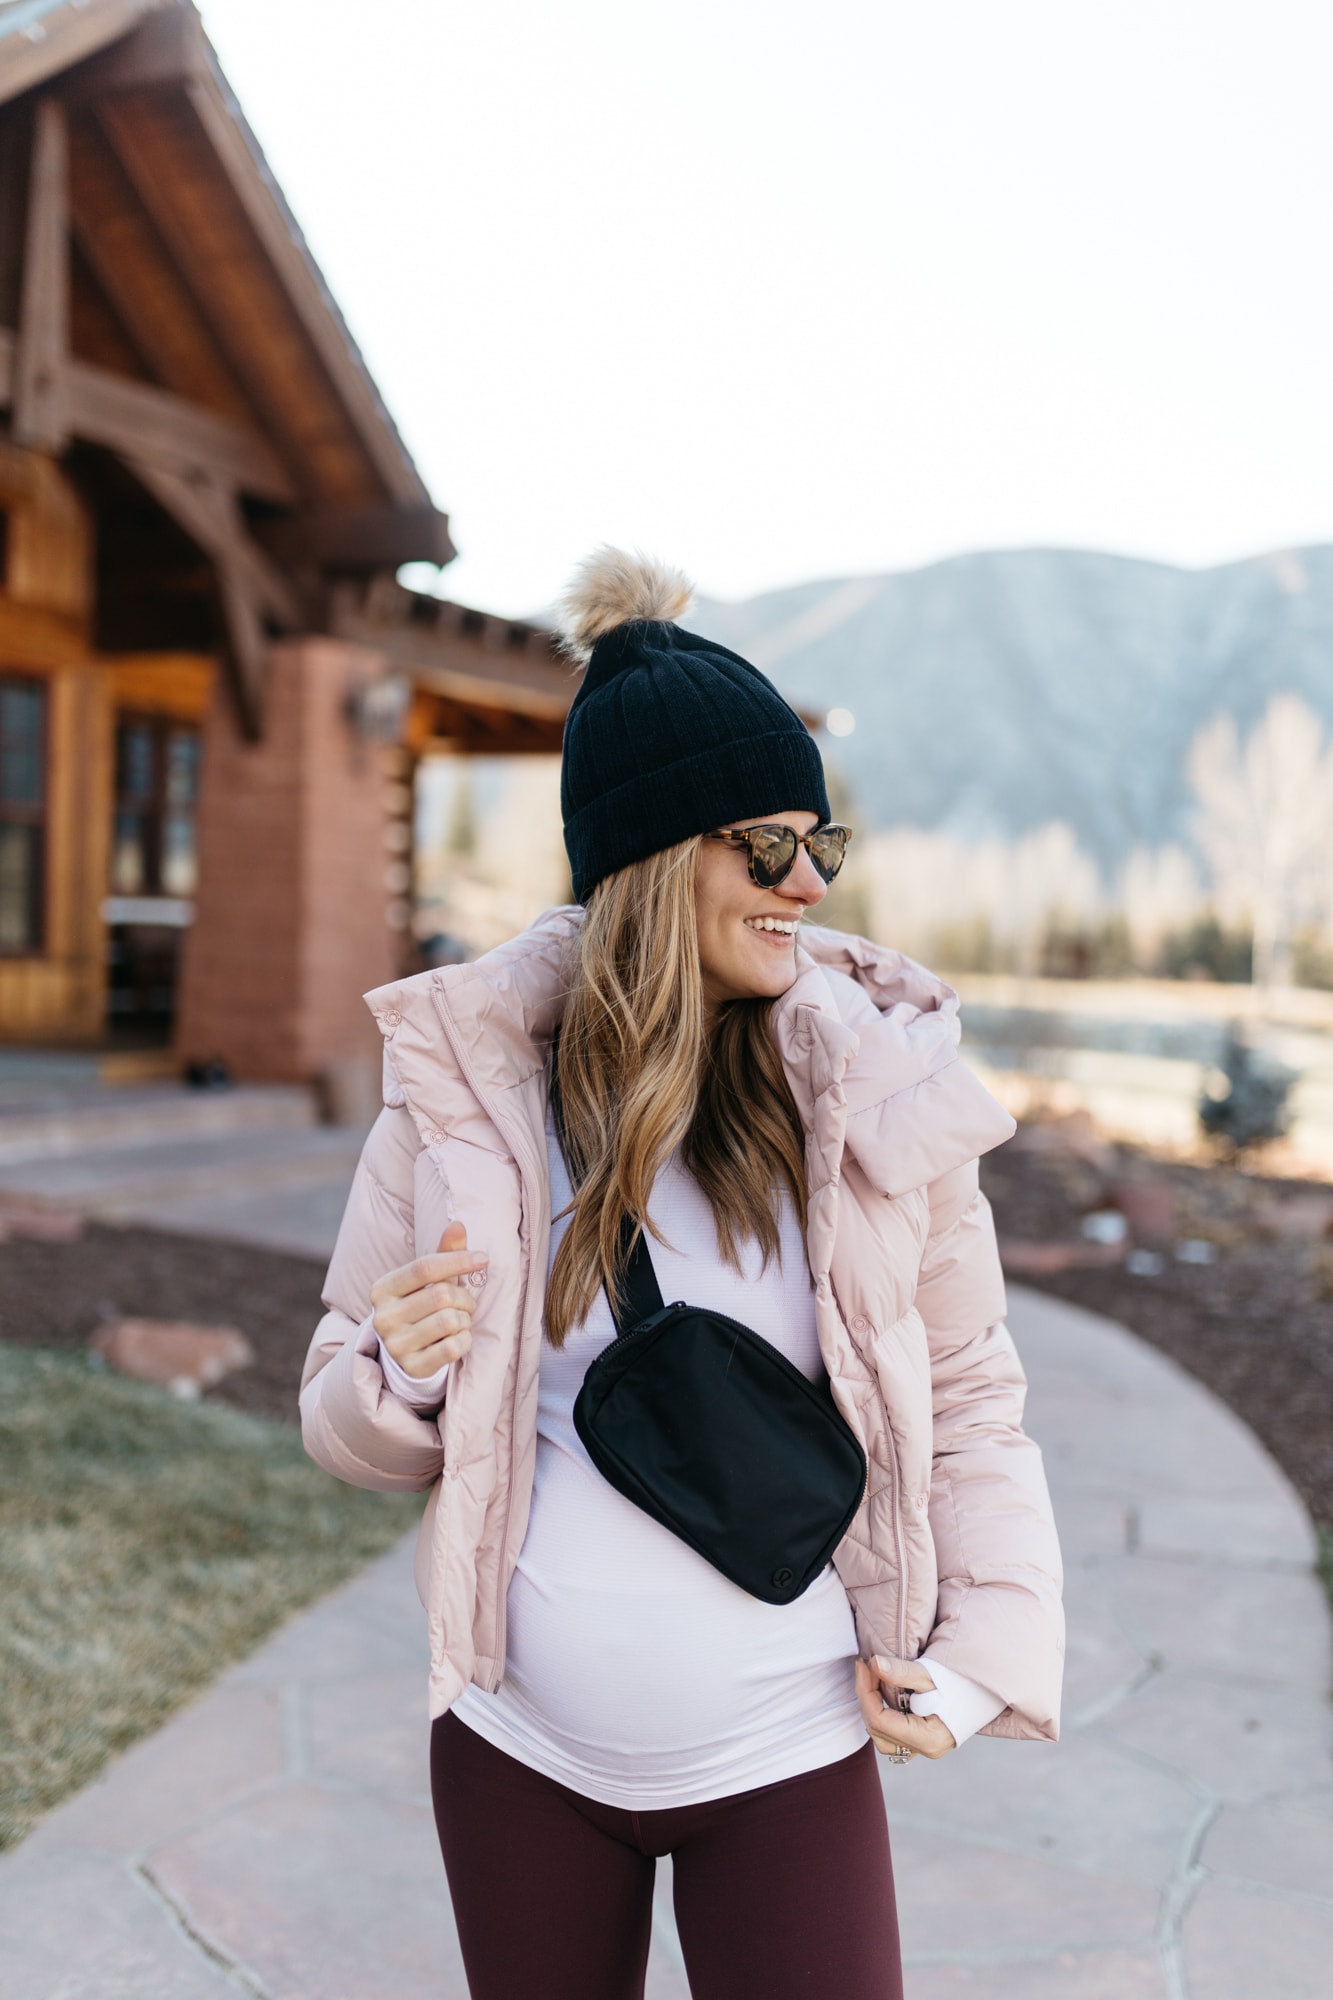 Winter Belt Bag Outfit ⋆ chic everywhere